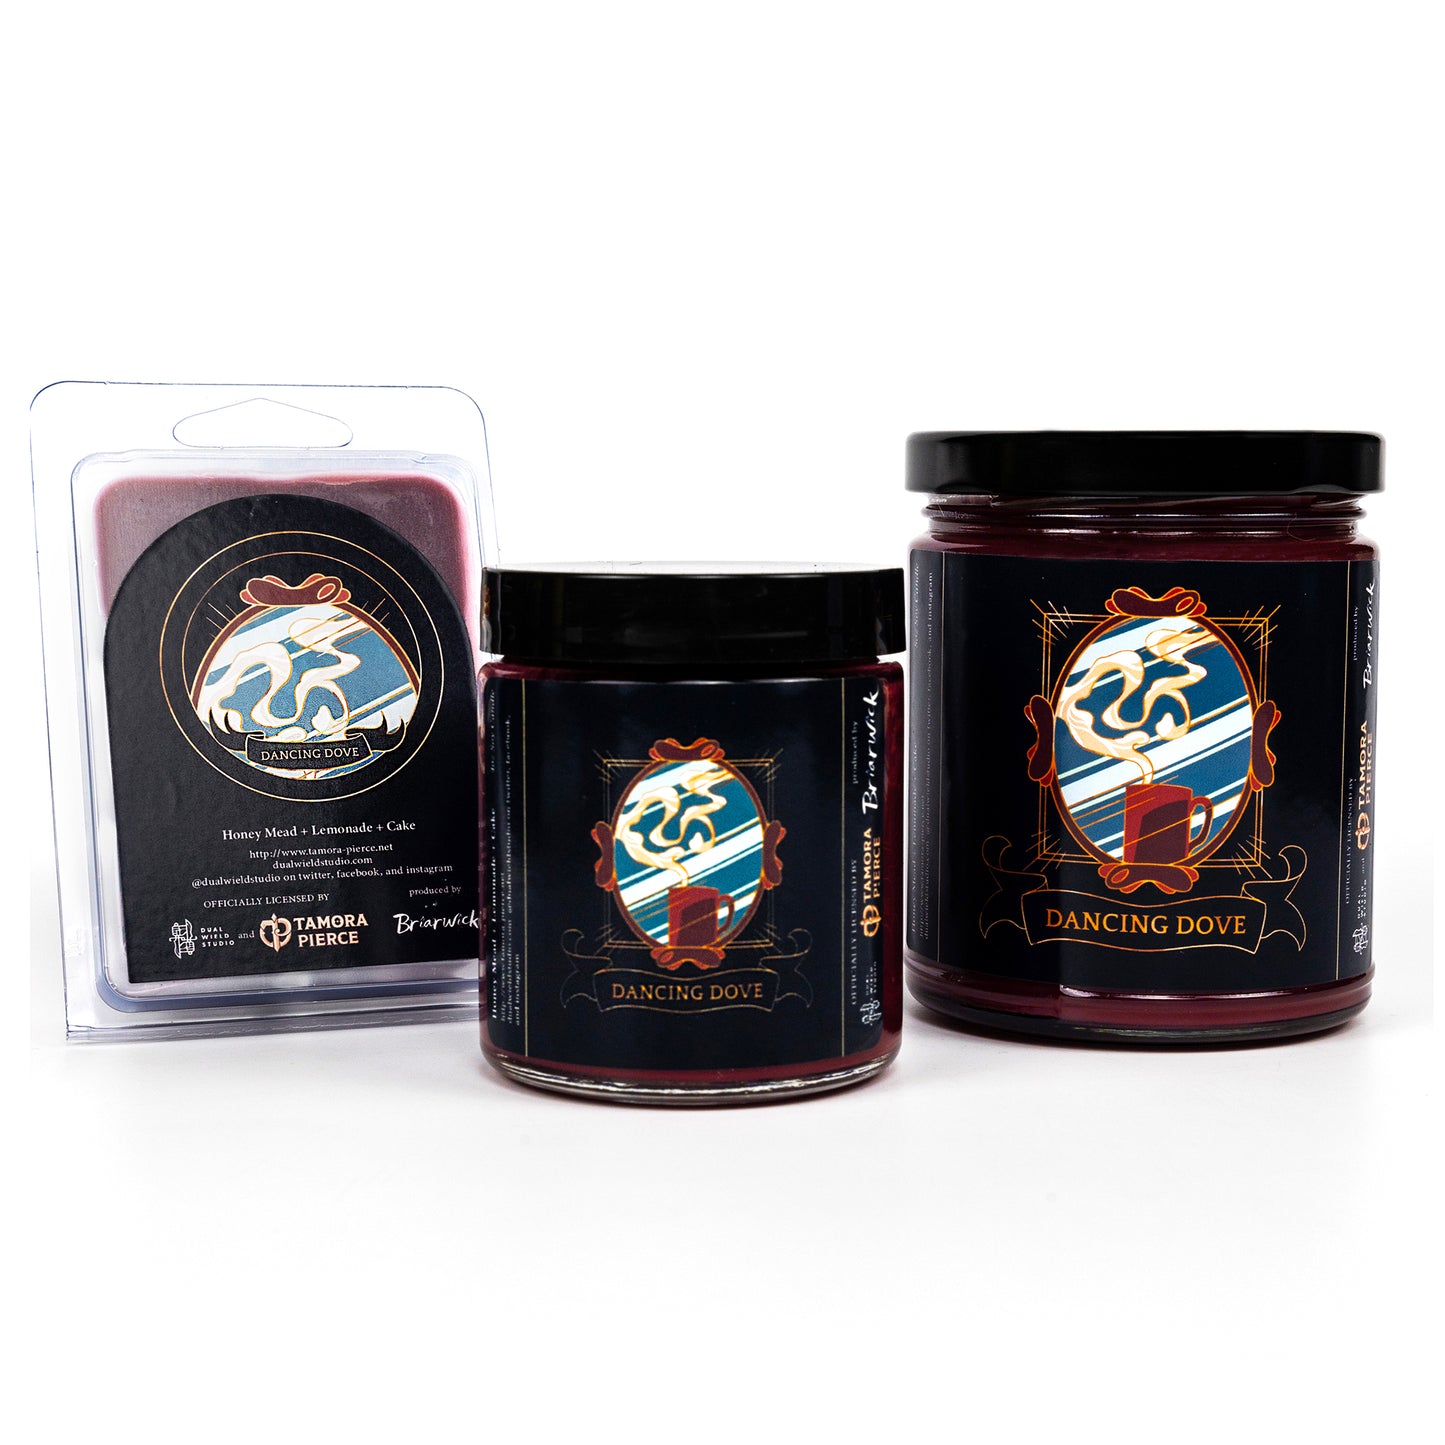 Full set of both Dancing Dove candles and wax melts, all with dark cranberry wax. The label illustration shows a warm cinnamon colored mug emitting steam in front of a mirror. 